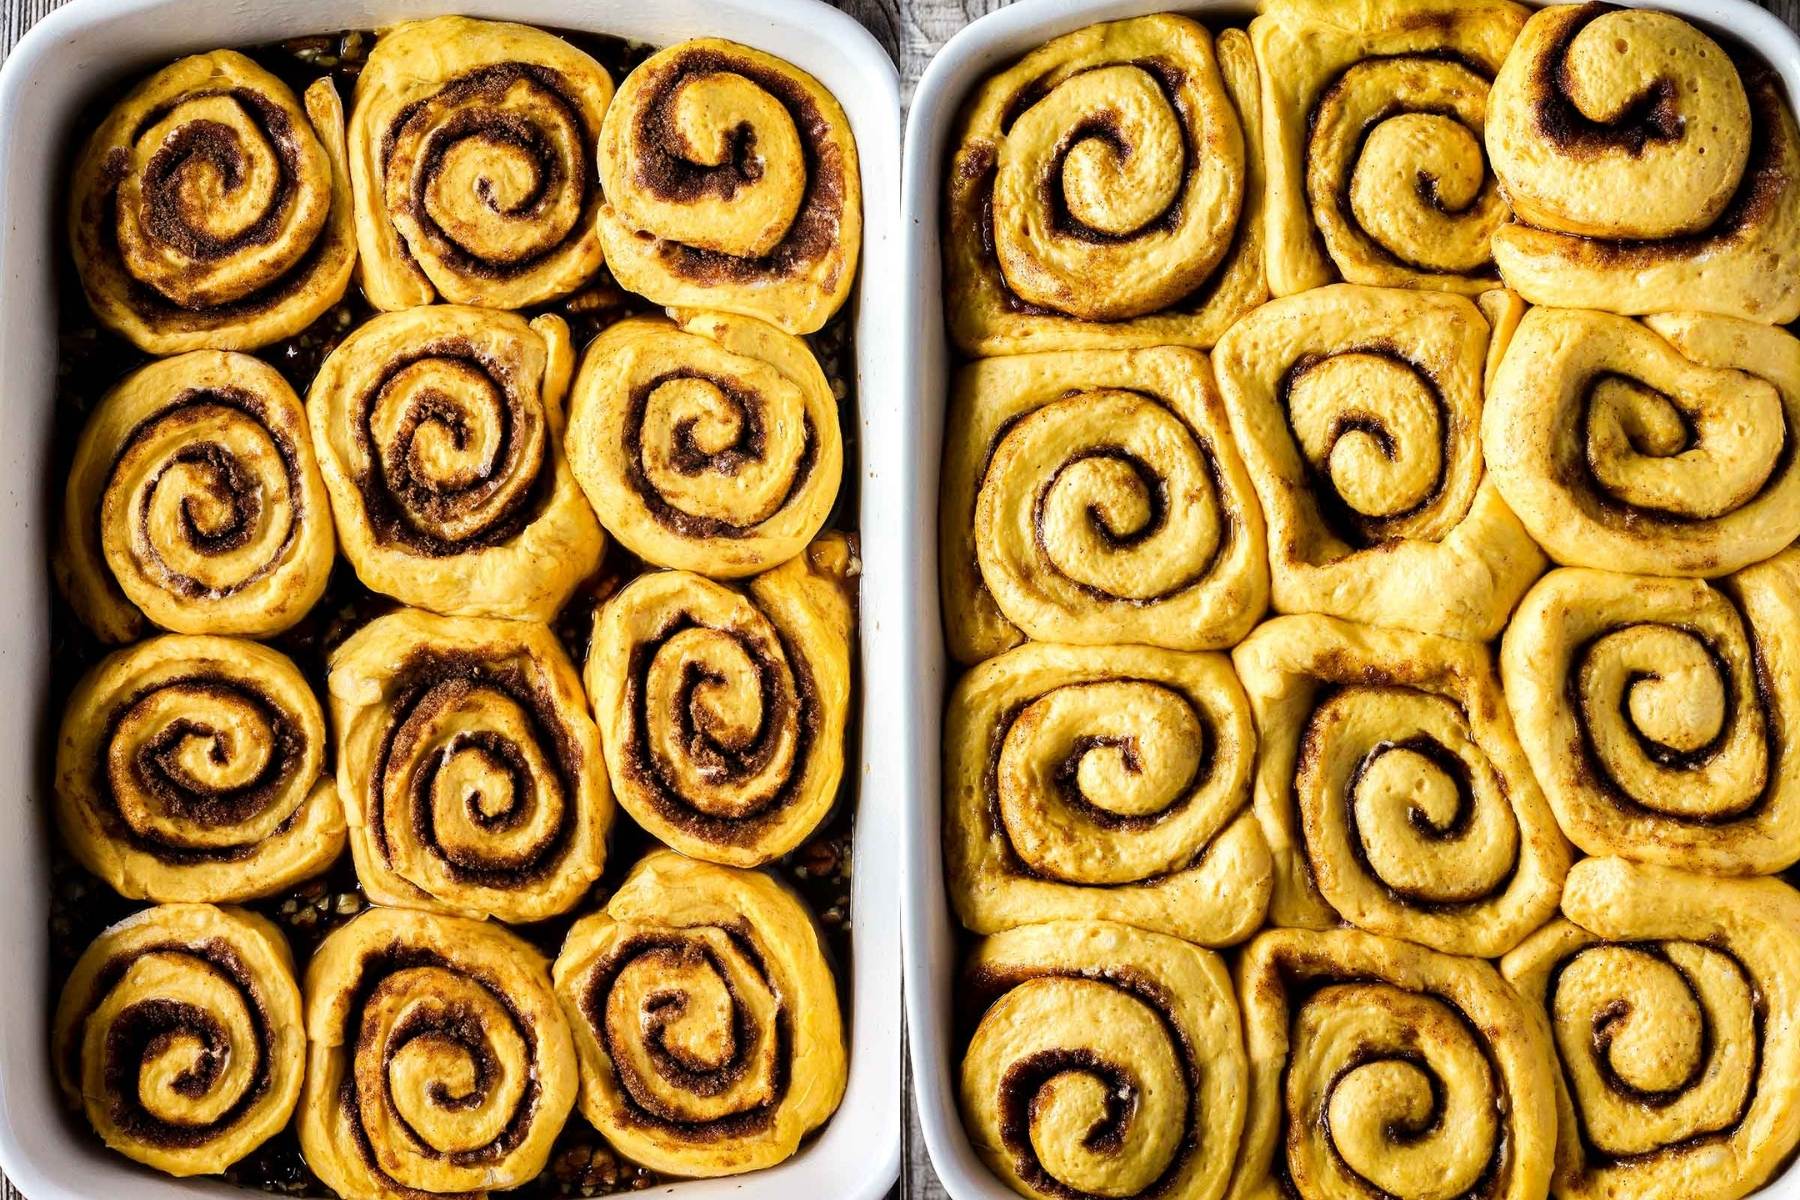 Rolls in baking dish before and after rising.